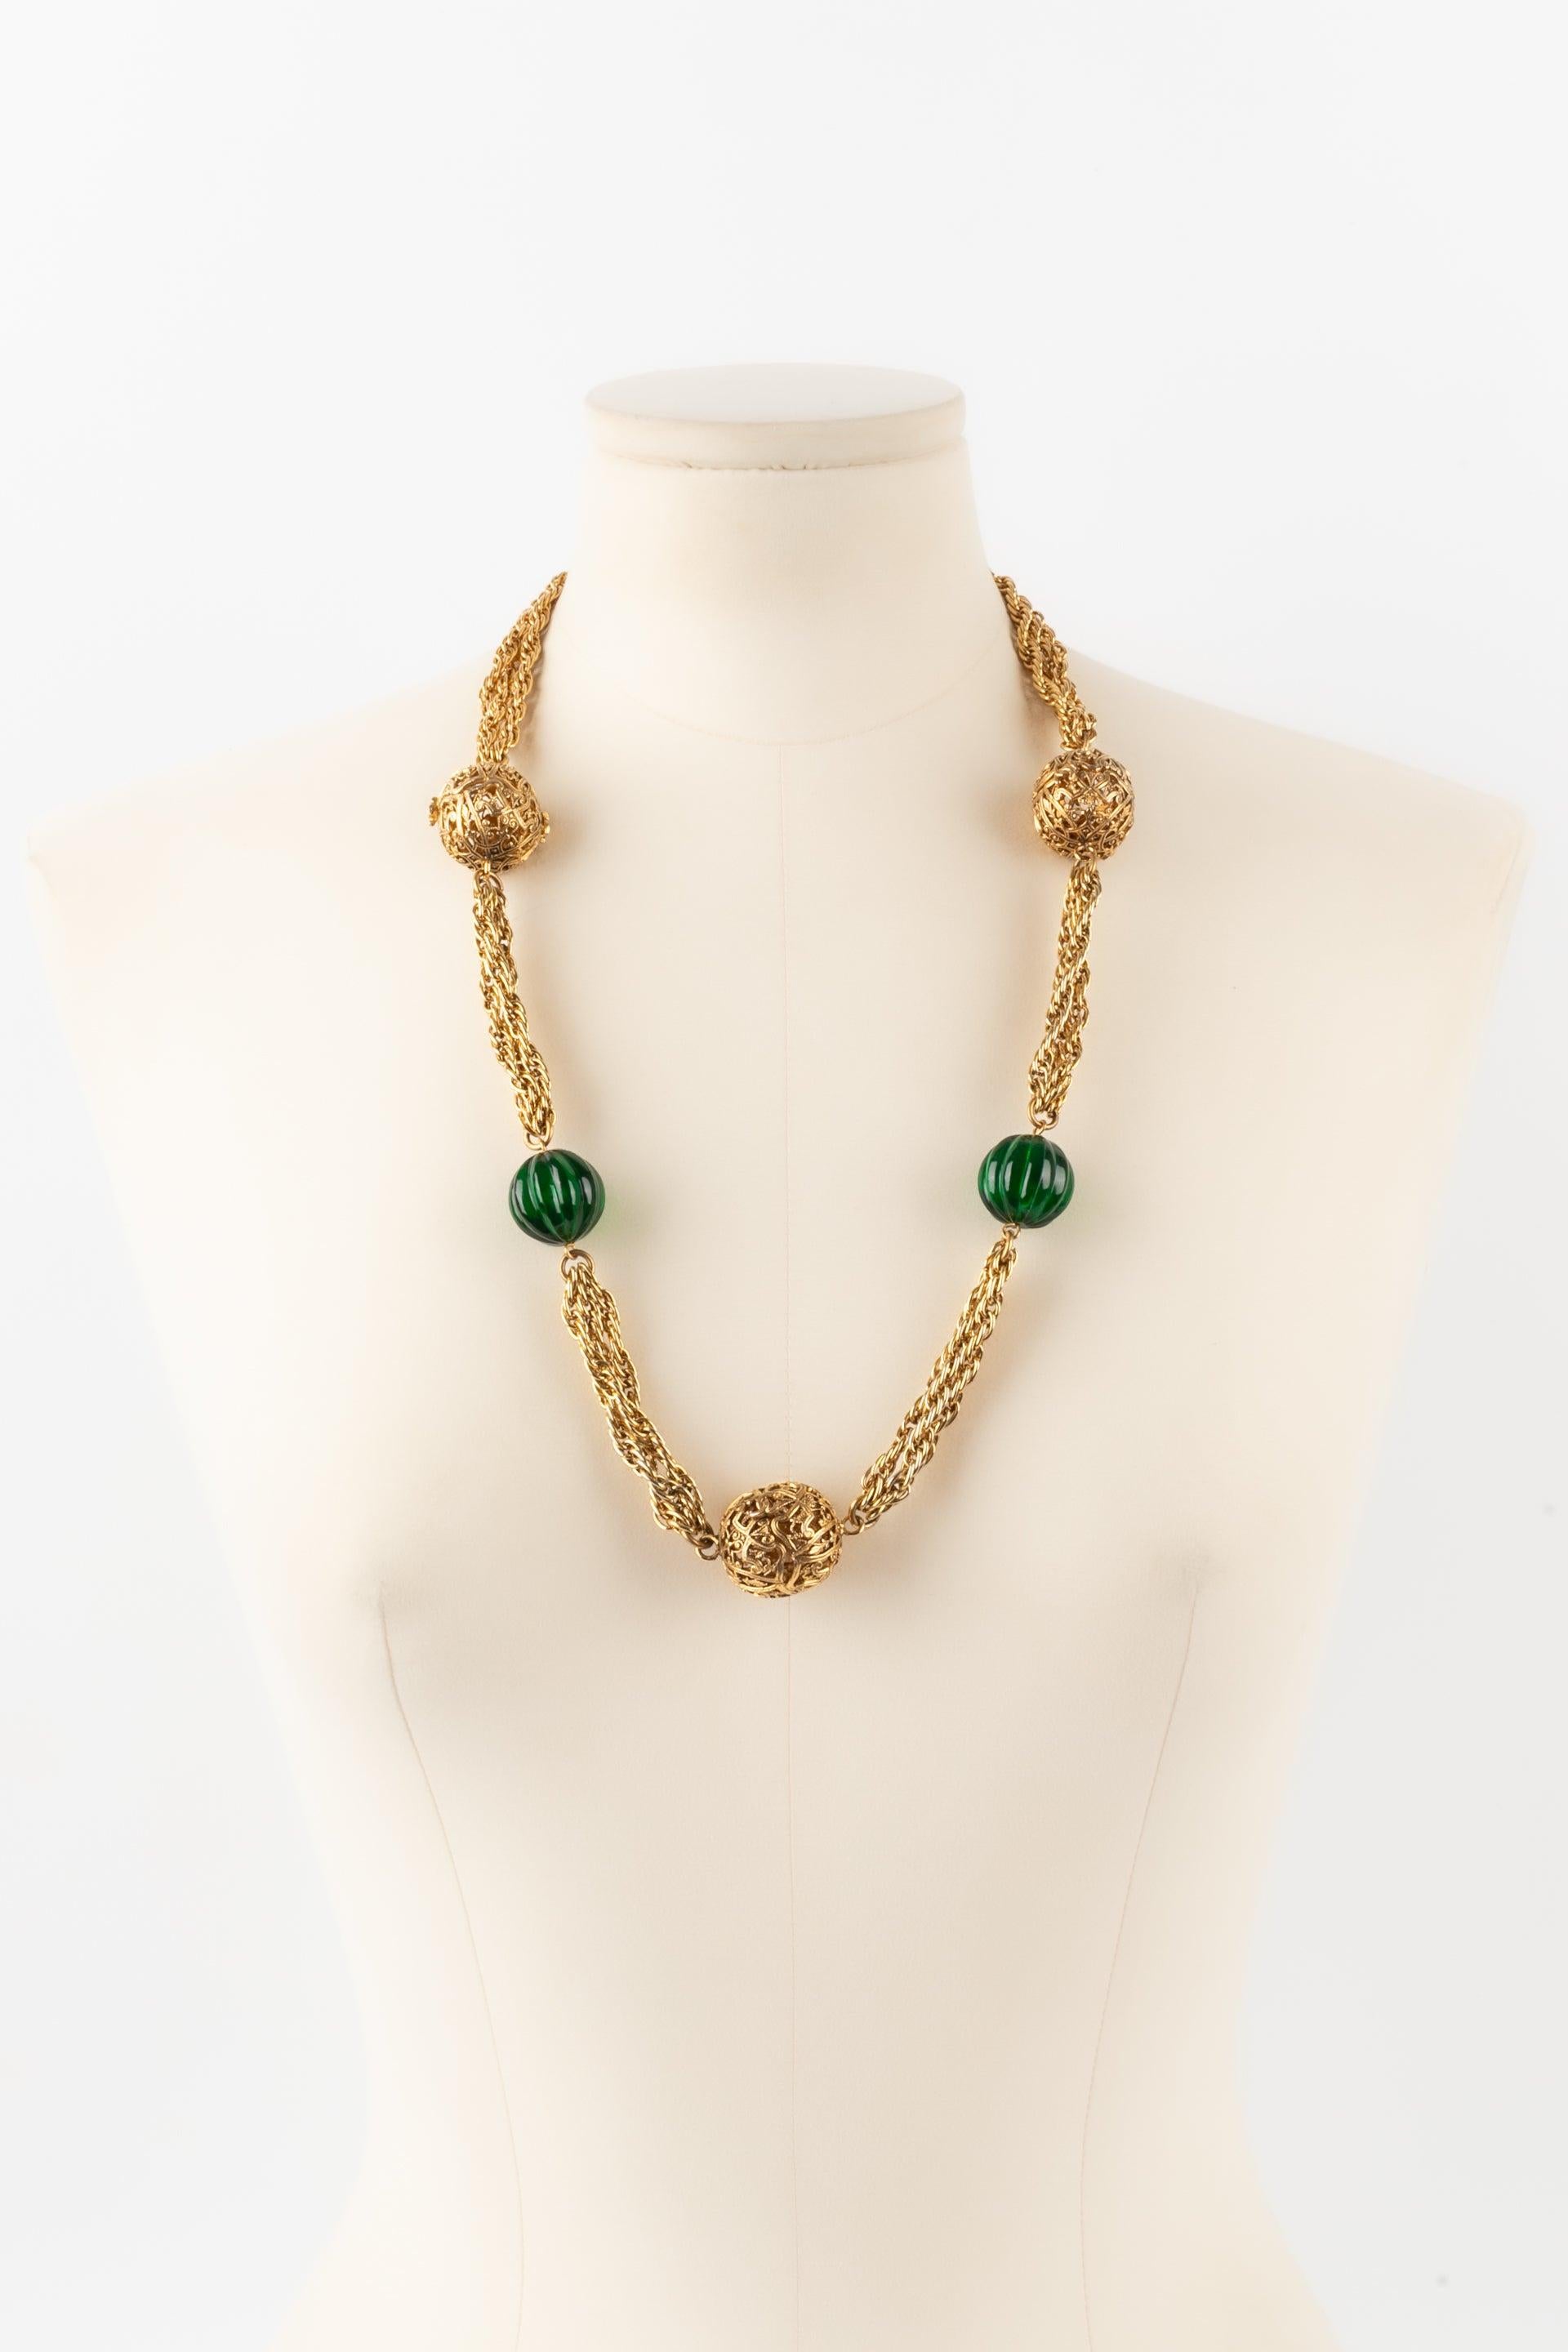 Chanel - (Made in France) Golden metal necklace with green pearls. 1984 Collection.

Additional information:
Condition: Very good condition
Dimensions: Length: 70 cm

Seller Reference: CB207